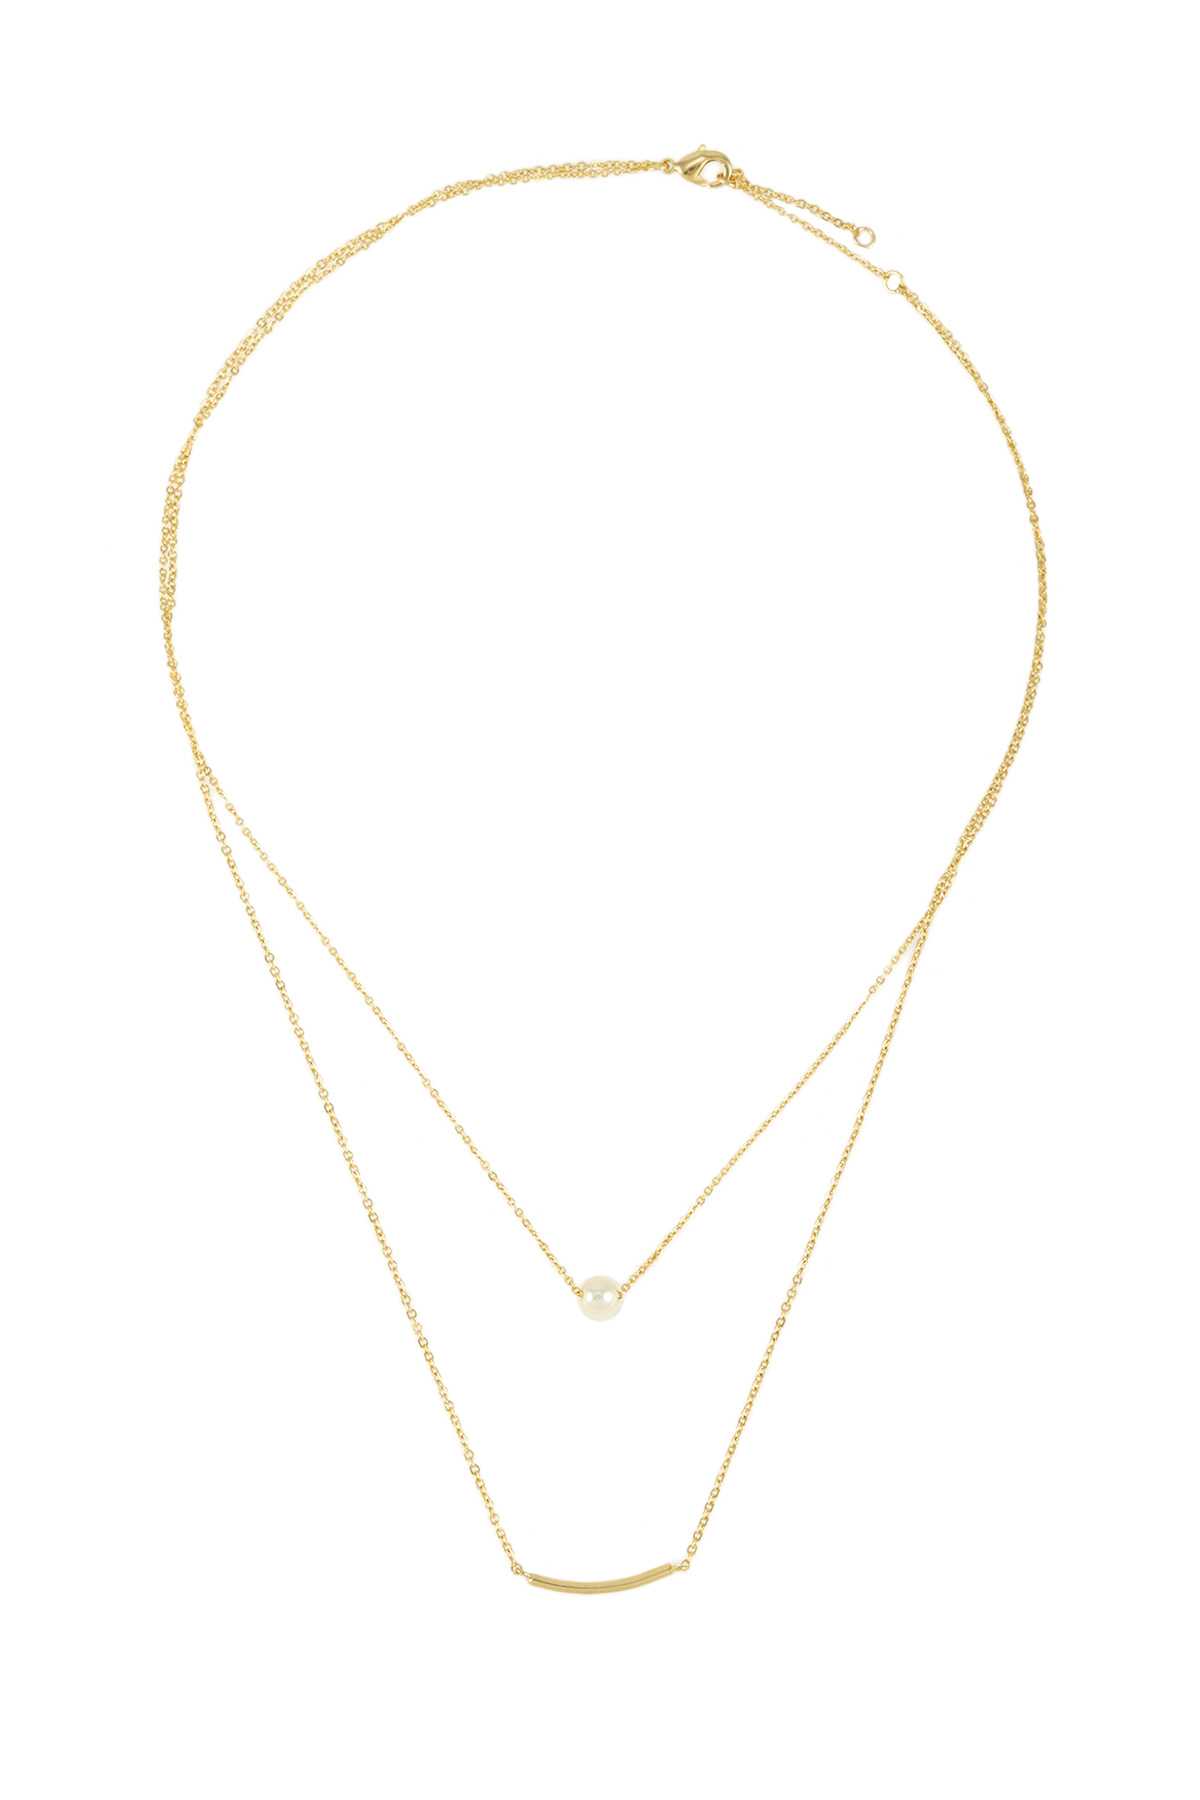 Pearl and Metal U Layered Chain necklace